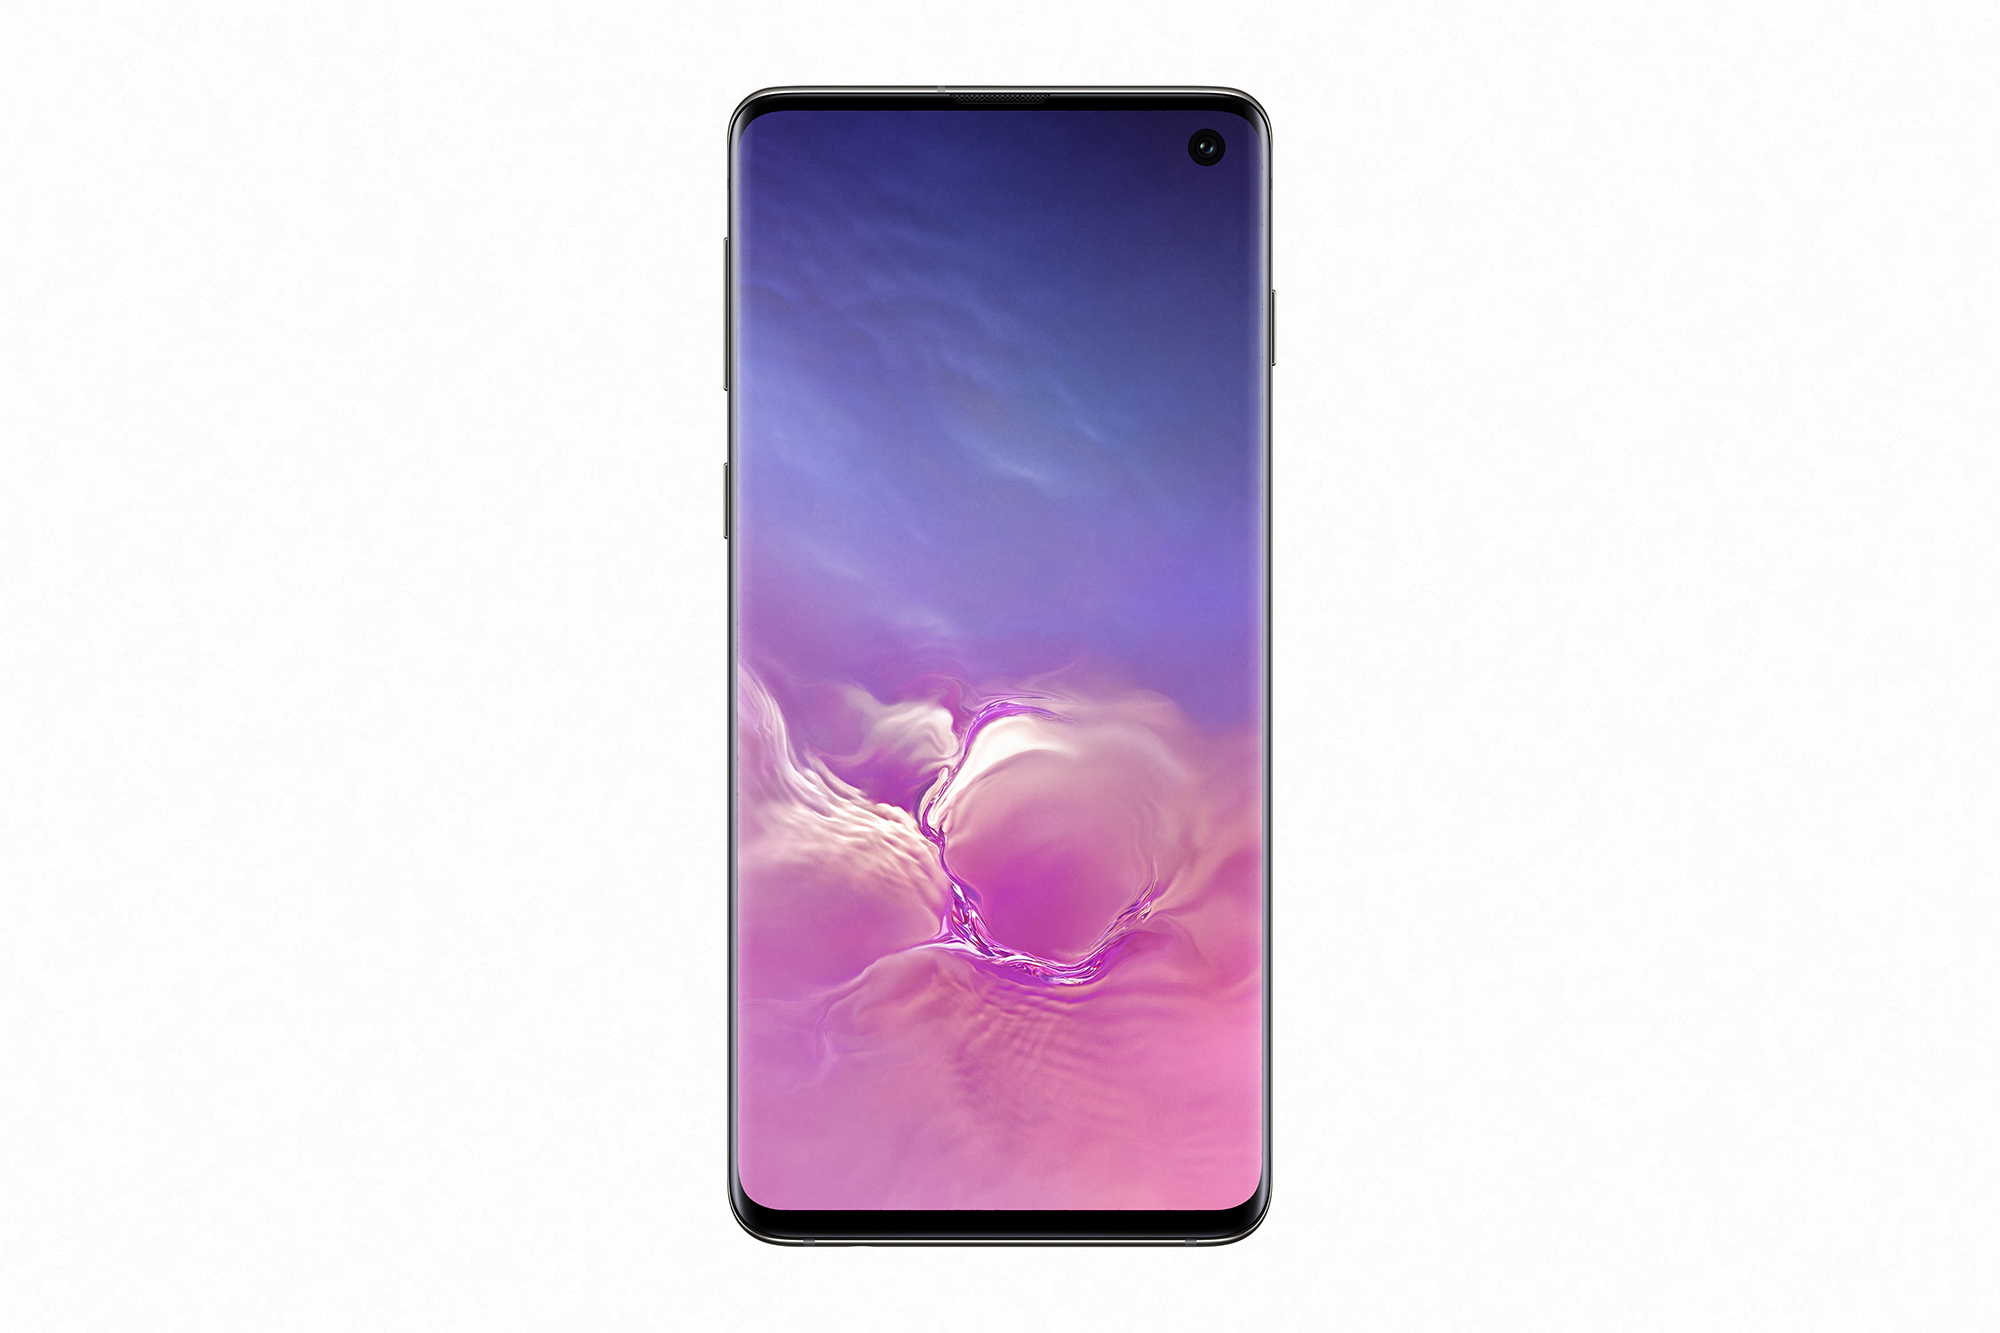 05_galaxys10_product_images_front_black